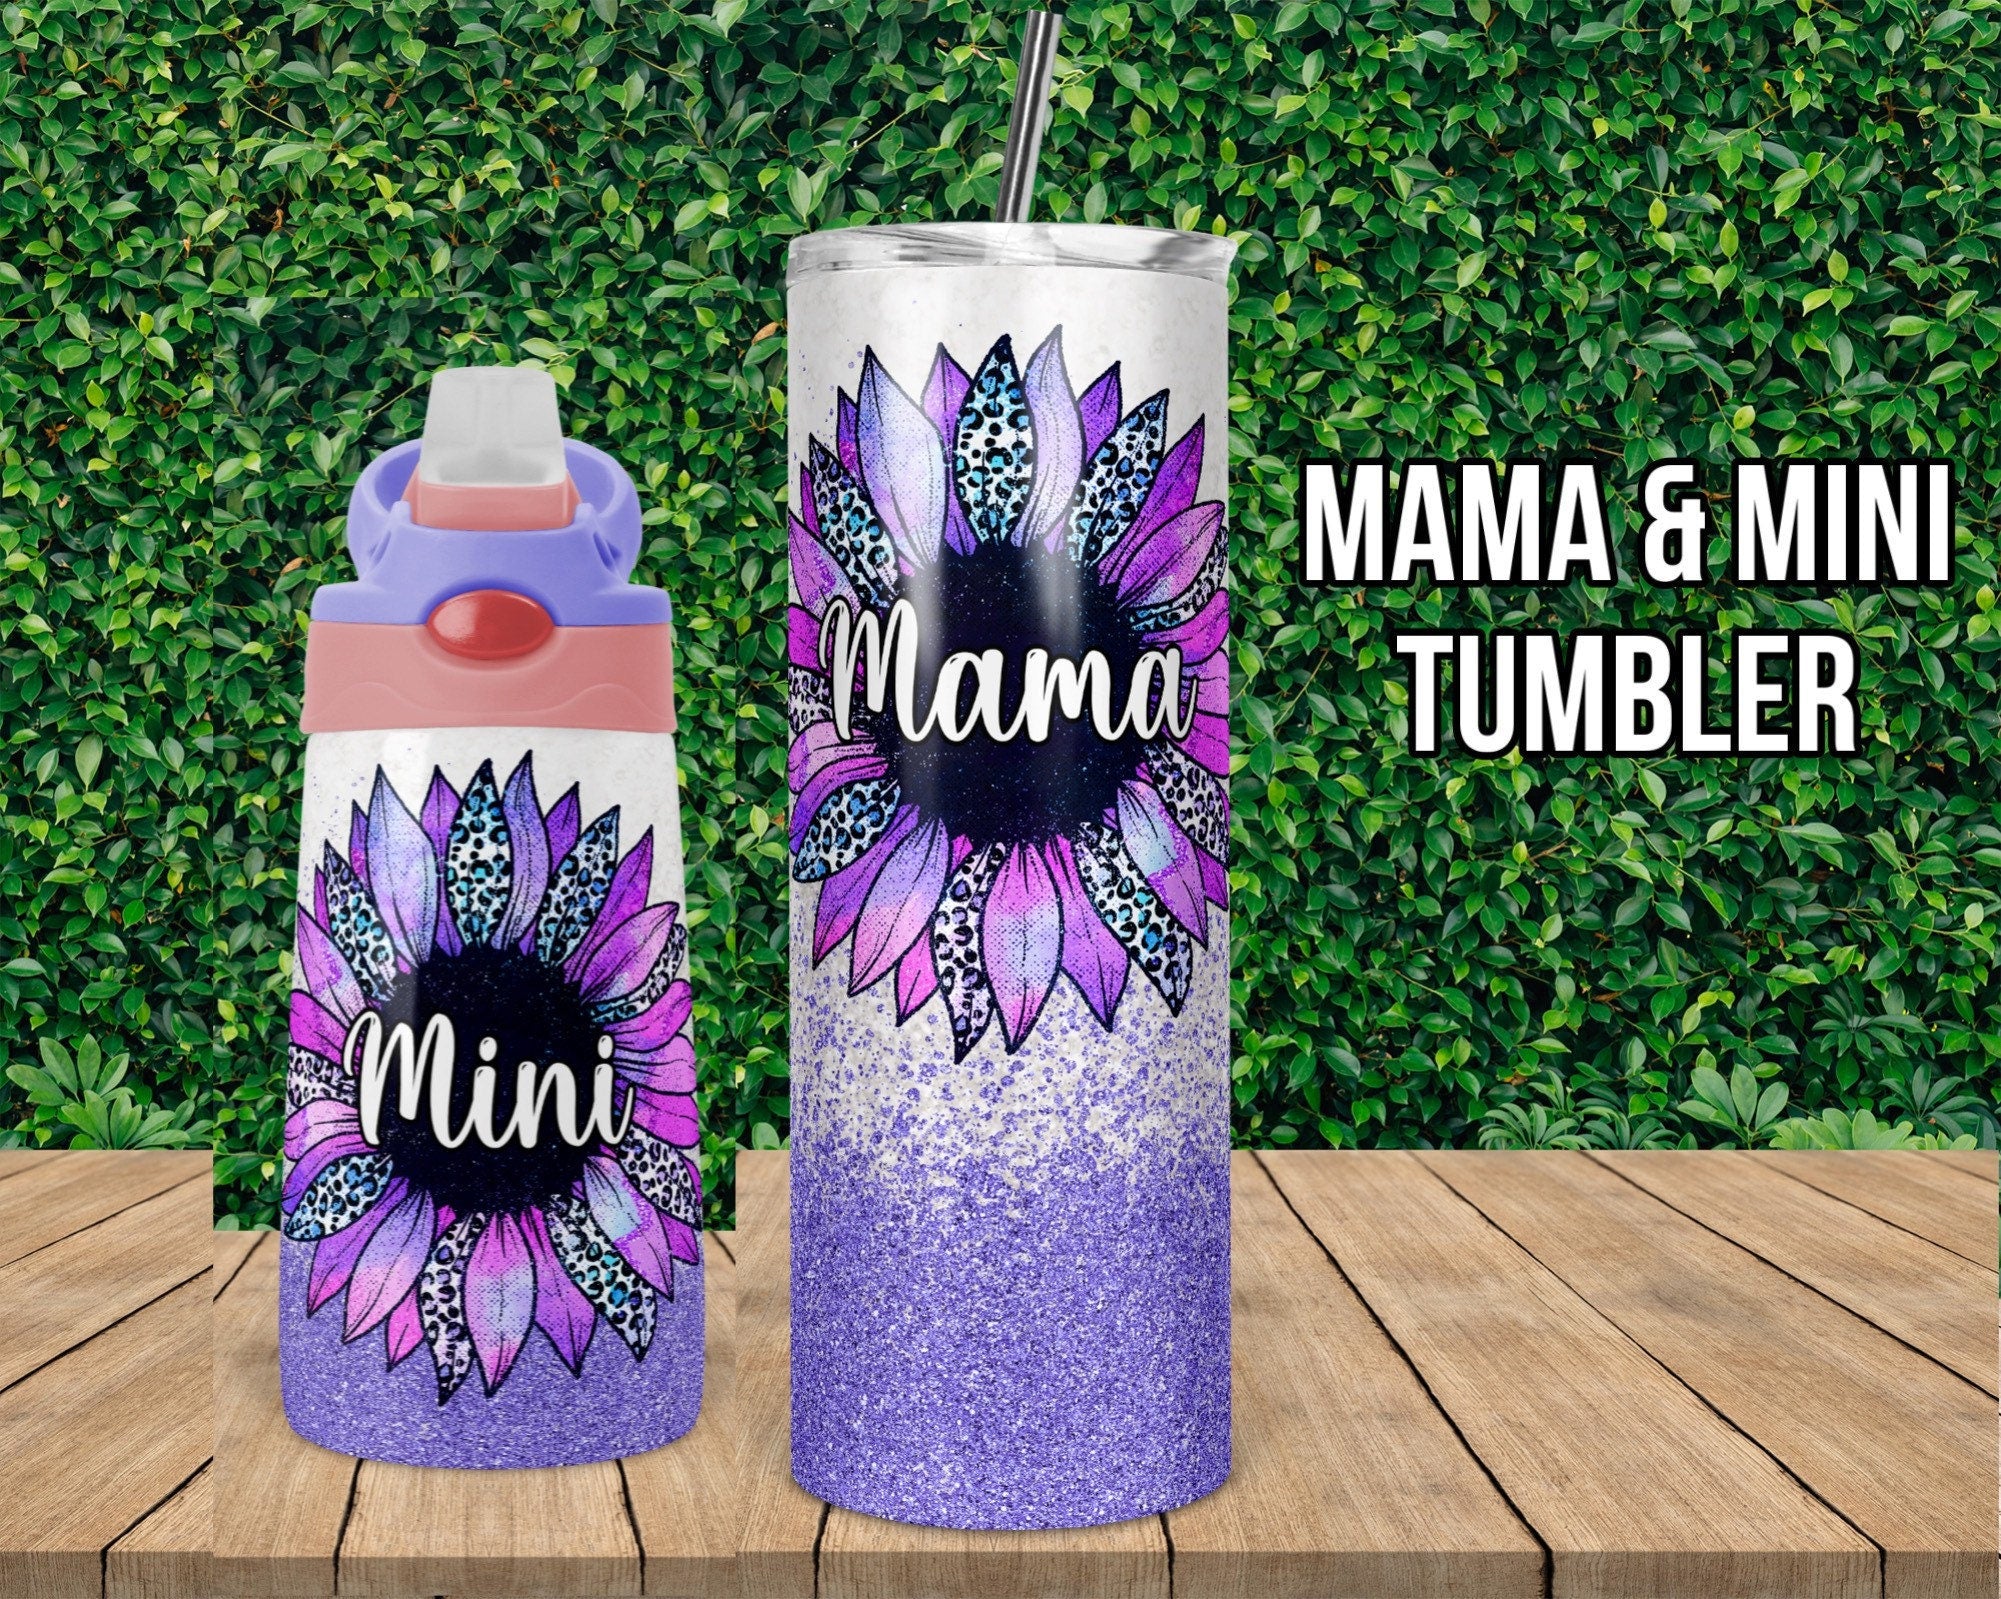 Mommy & Me Tumbler/sippy cup set